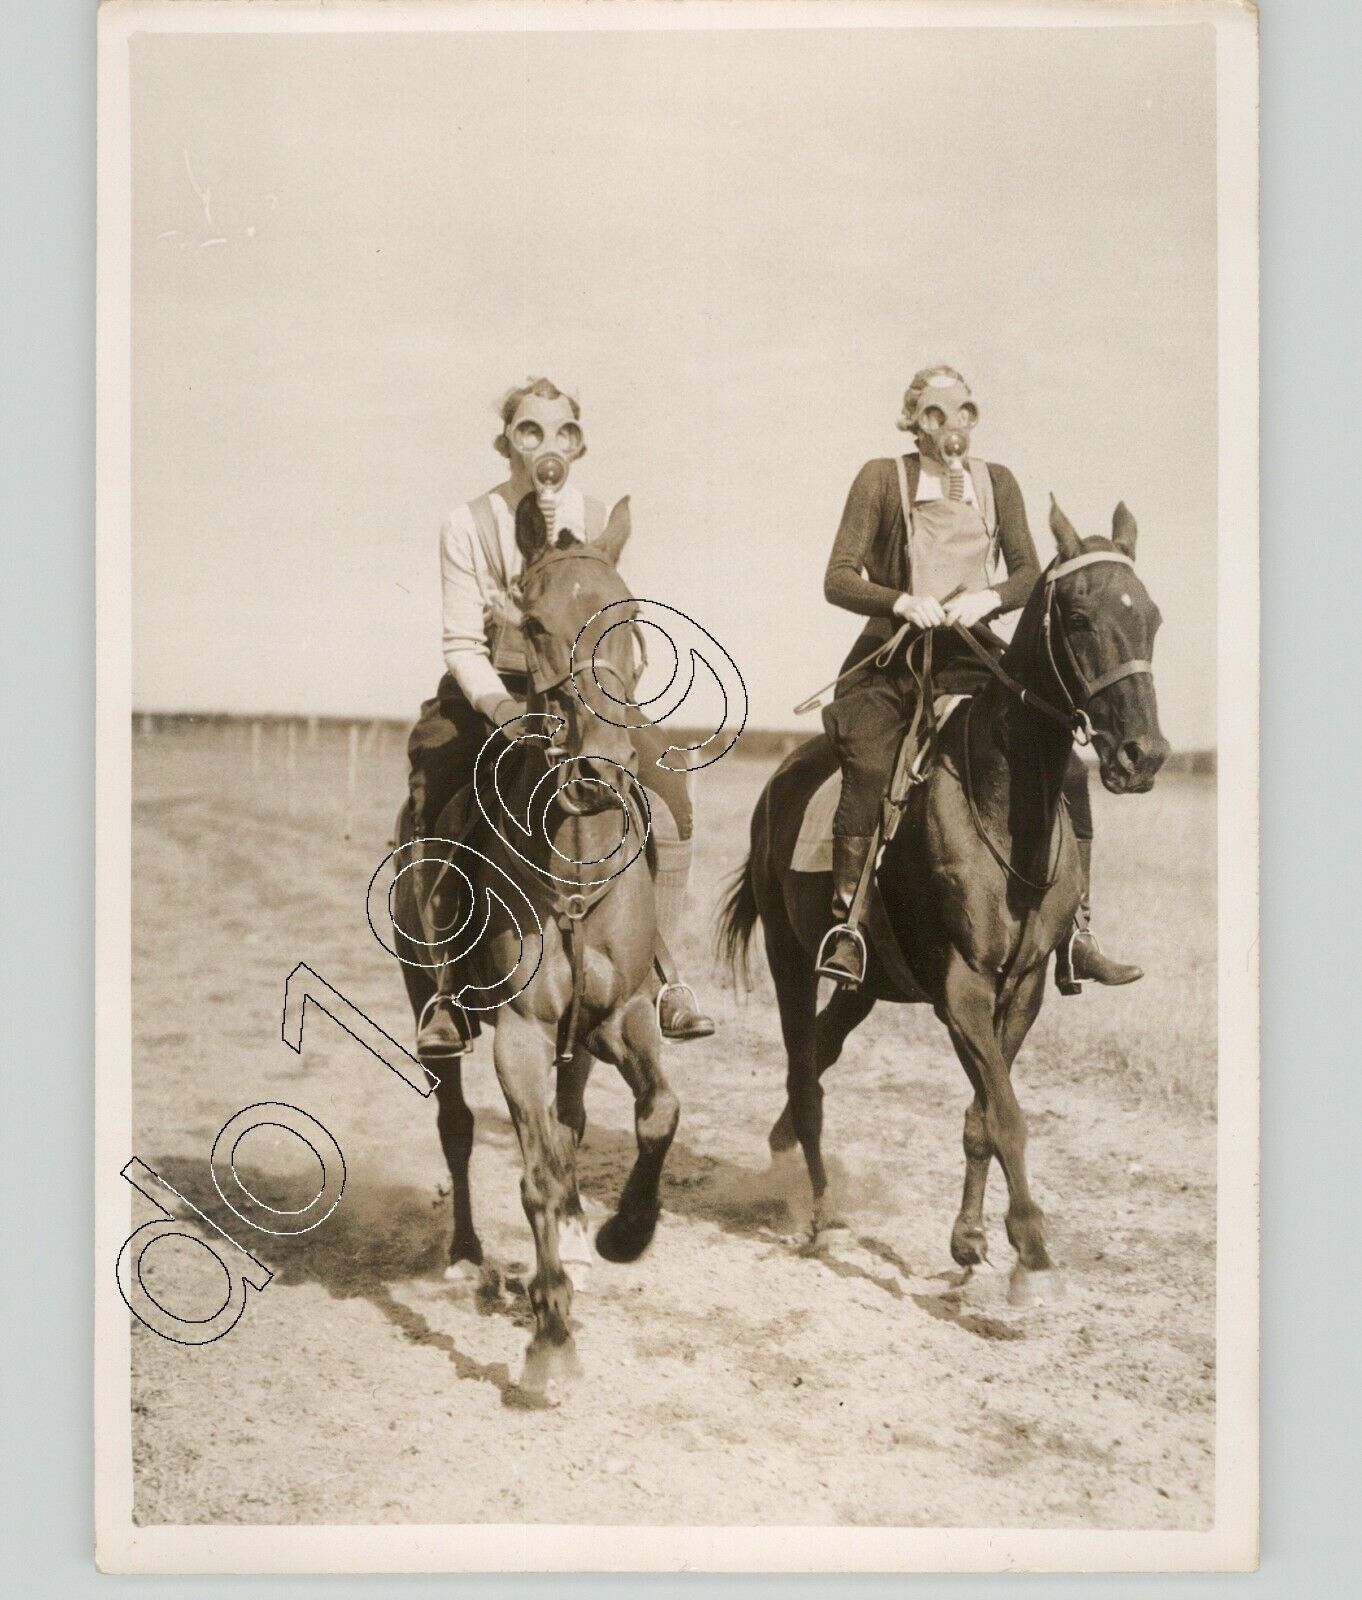 RED CROSS Volunteers On Horses In GAS MASKS Apocalyptic BIZARRE 1936 Press Photo